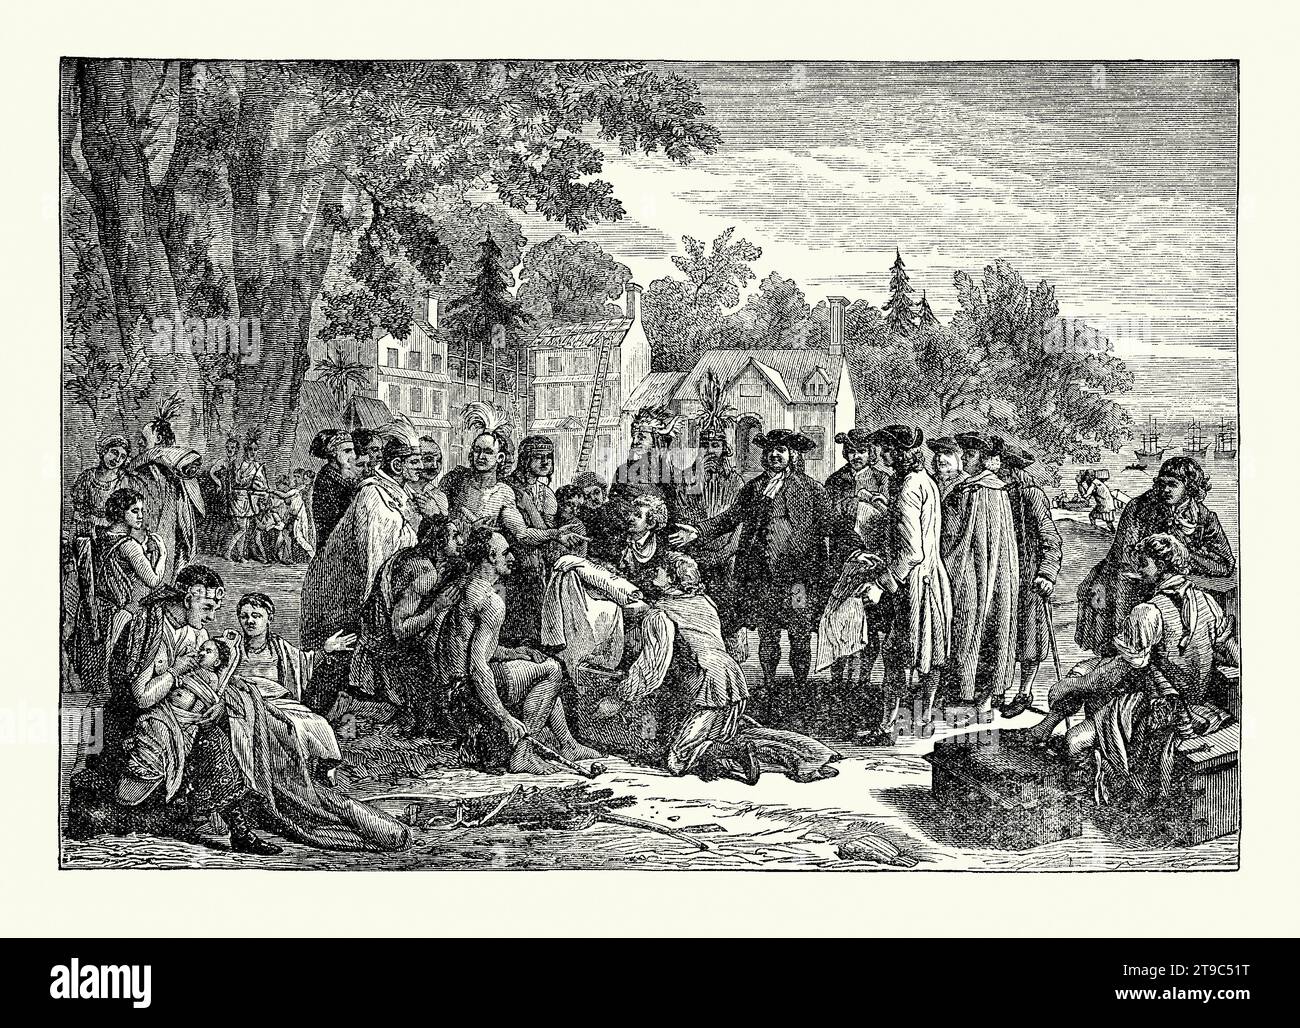 An old engraving depicting The Treaty of Penn with the Indians (or Penn's Treaty with the Indians at Shackamaxon (present-day Fishtown), Pennsylvania, USA in 1683. It is from an American history book of 1895. William Penn entering into the treaty with Tamanend, a chief of the Lenape (Delaware Indian) Turtle Clan, under an elm tree near the village of Shackamaxon. The peace between the Lenape Turtle Clan and Penn’s successors would endure for over 70 years, until the Penn’s Creek Massacre of 1755. Stock Photo